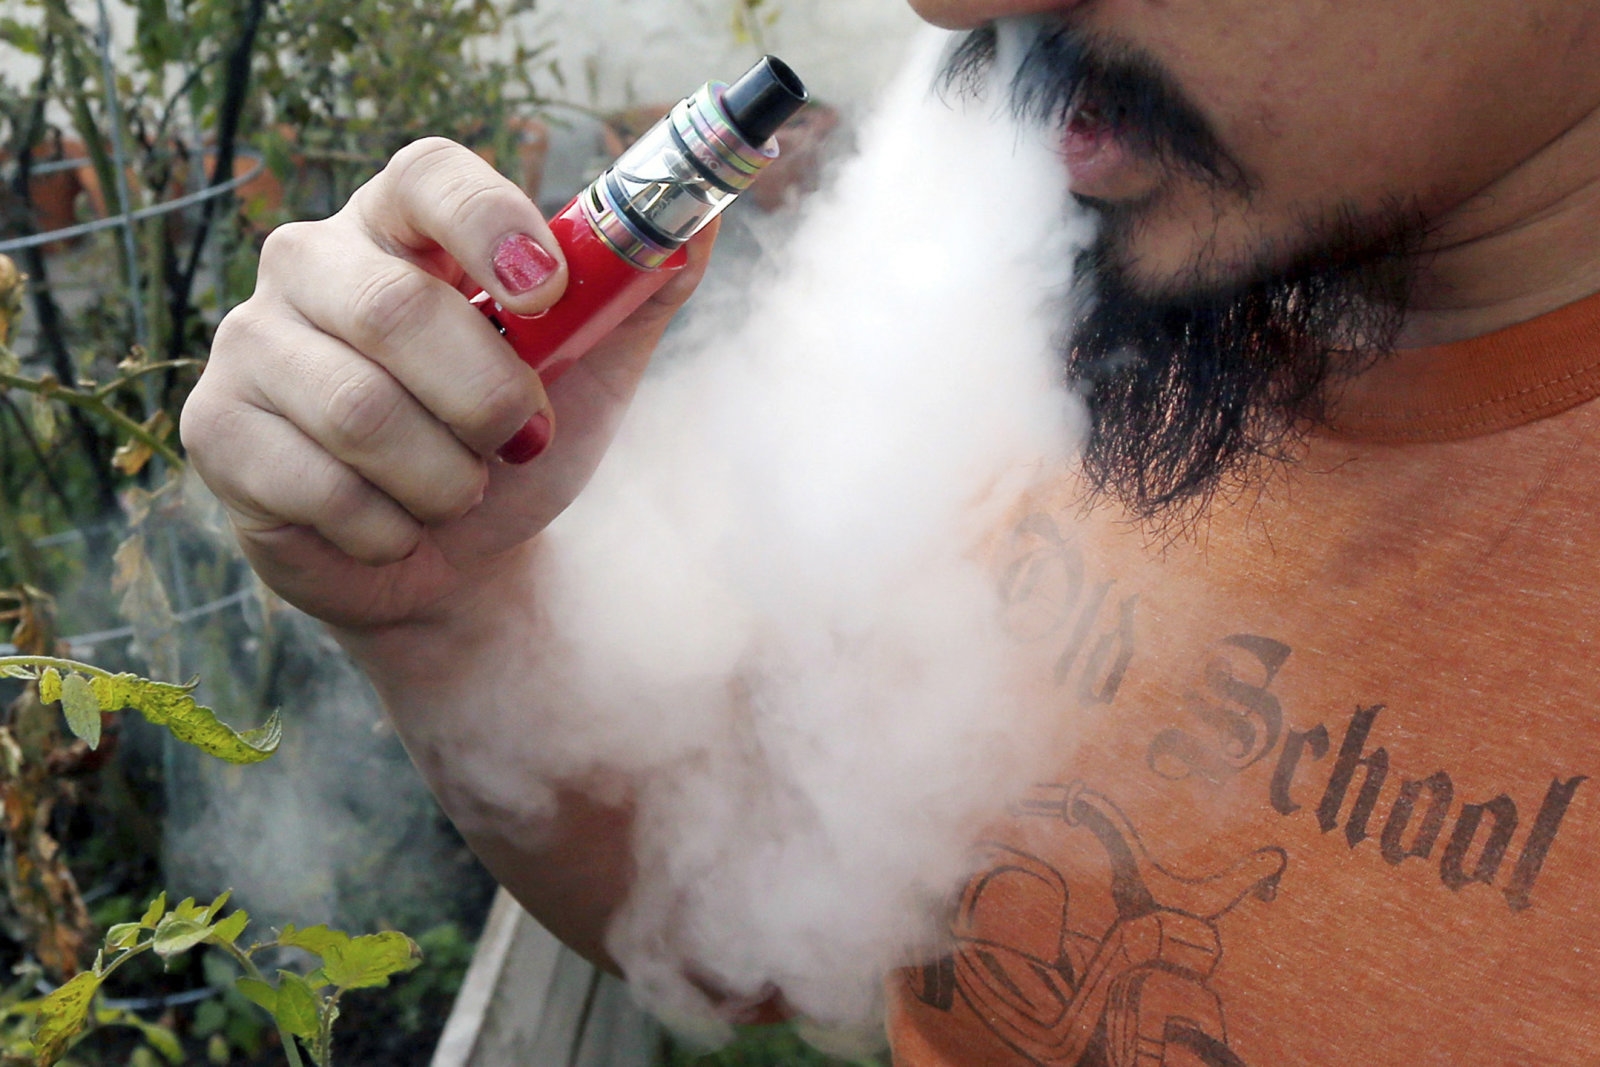 CDC says a toxic compound may be responsible for vaping illnesses | DeviceDaily.com